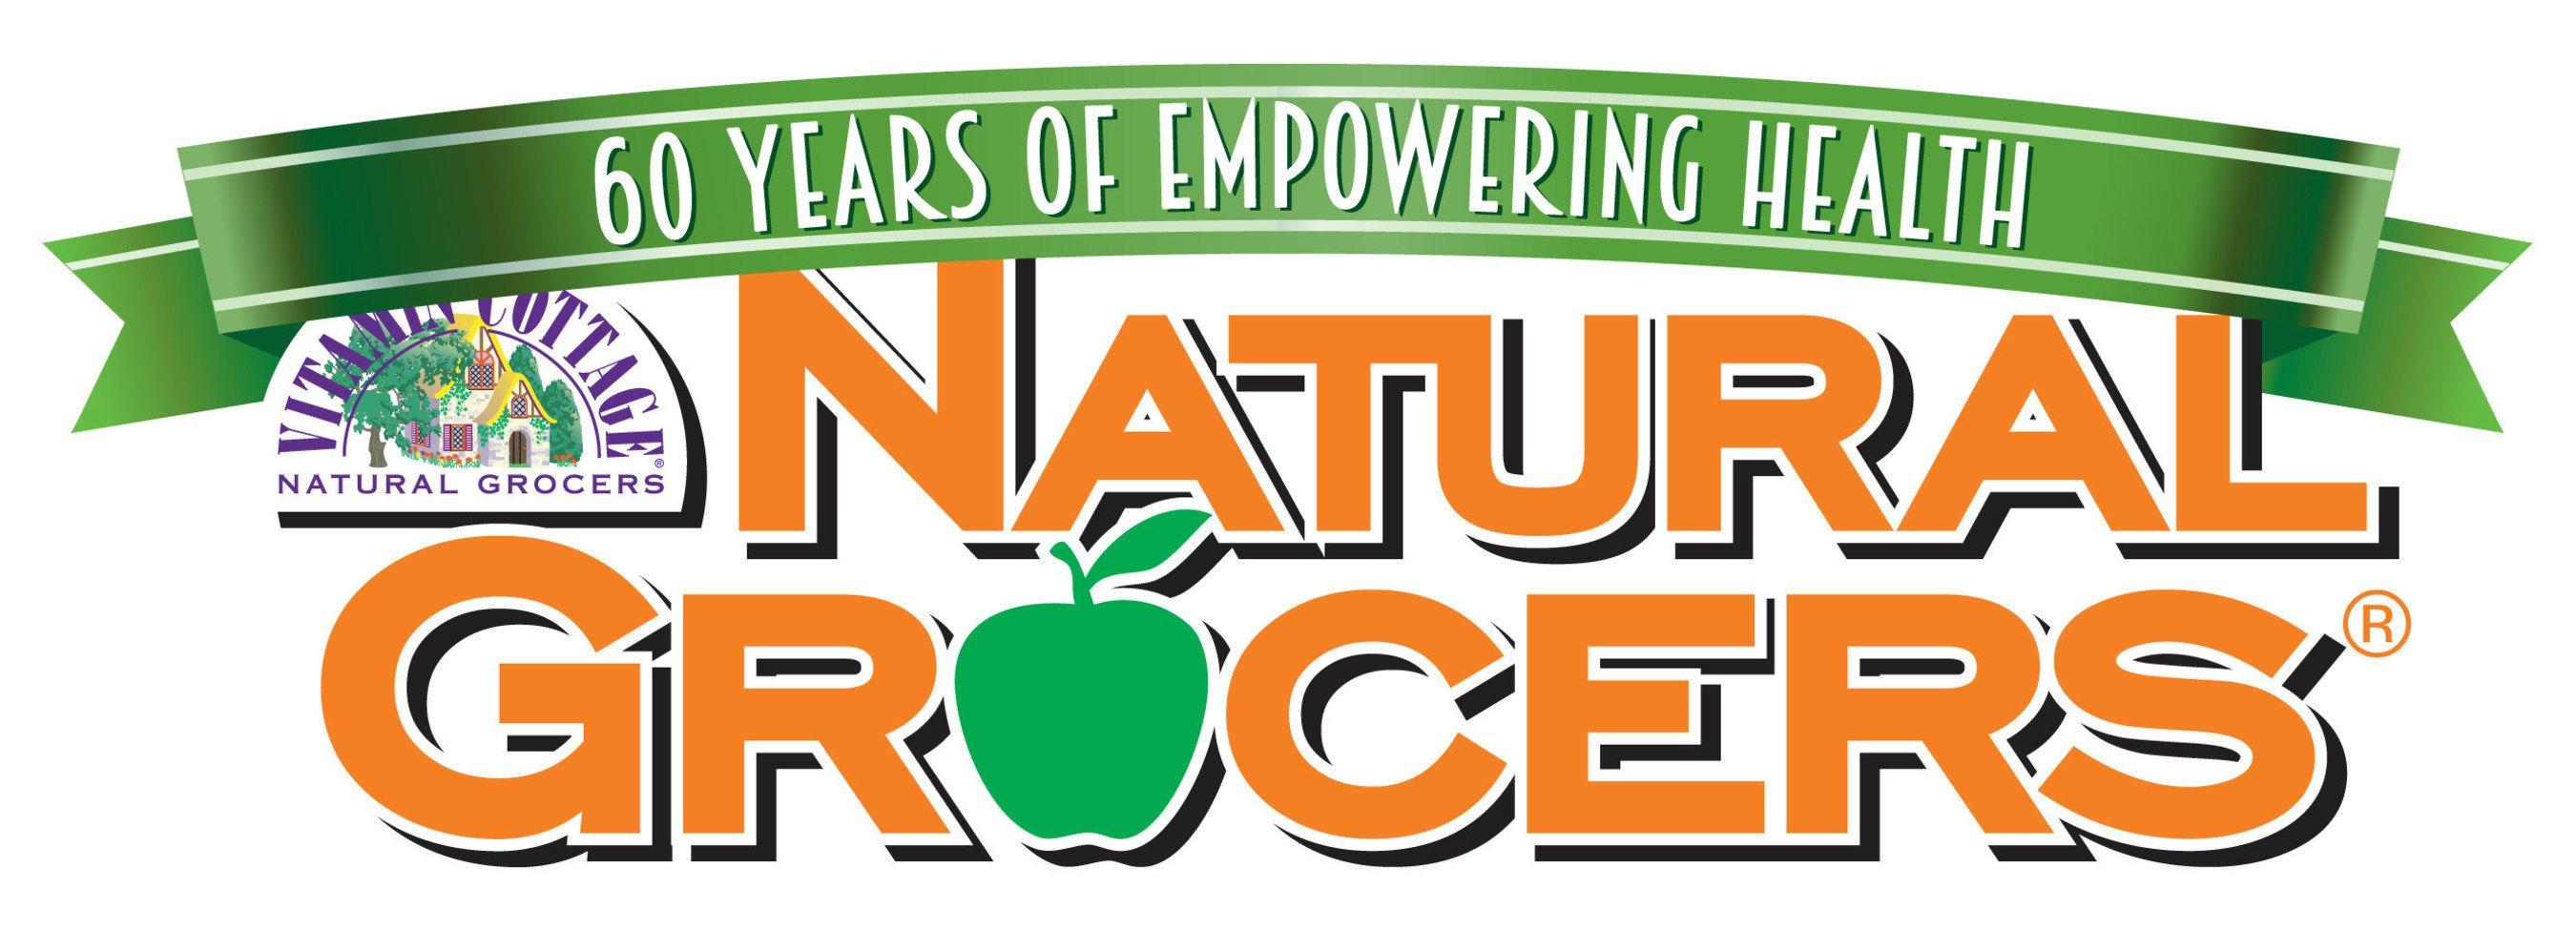 Natural Grocers Logo - Natural Grocers and Instacart Partner to Offer Grocery Delivery